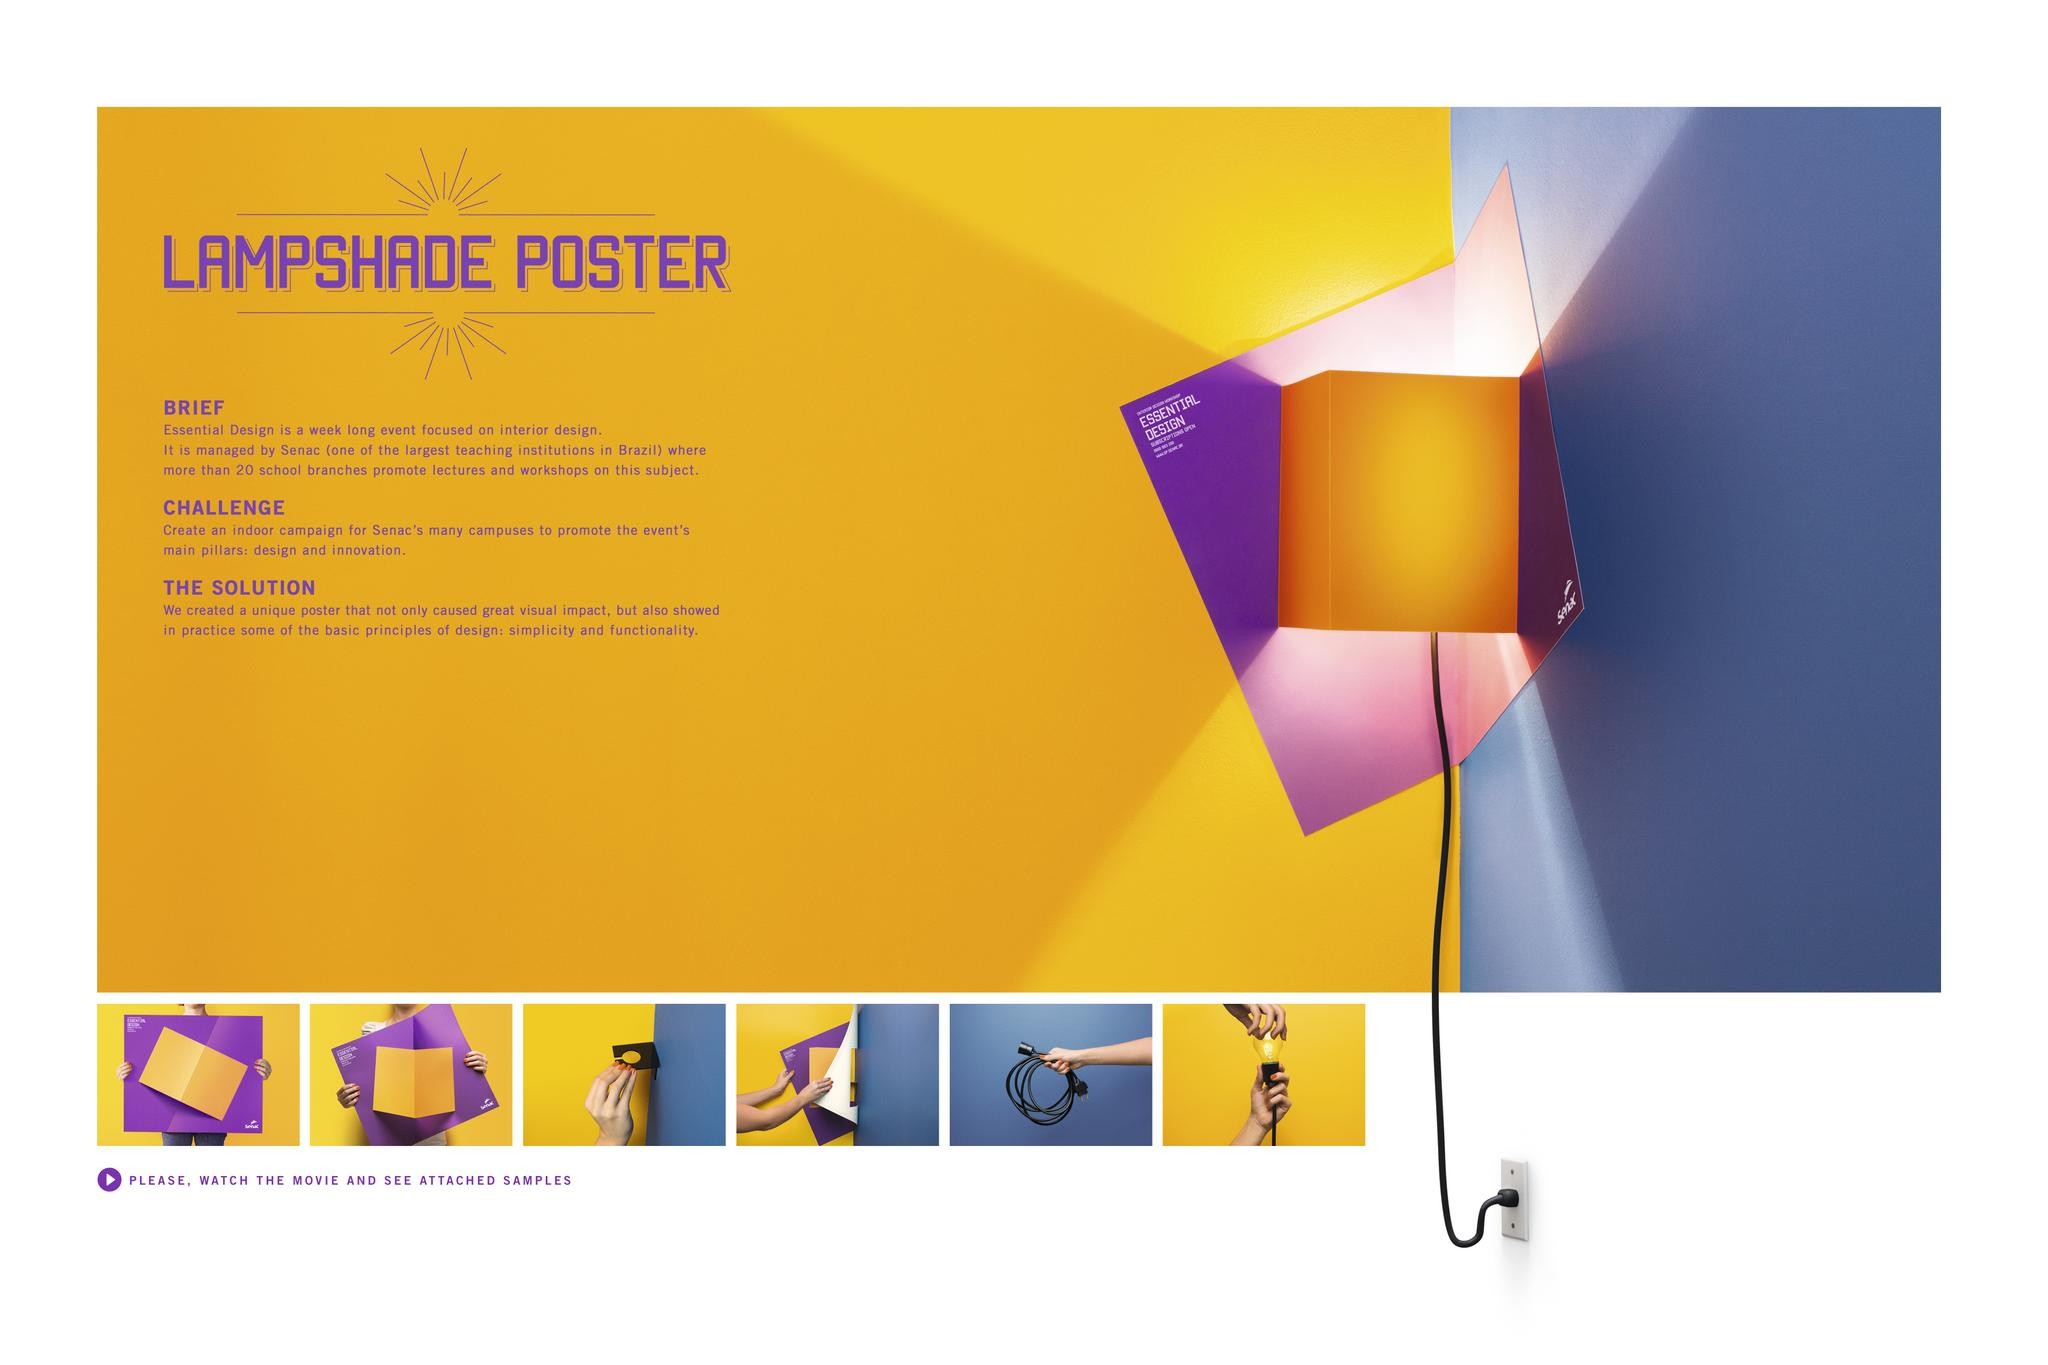 LAMPSHADE POSTER